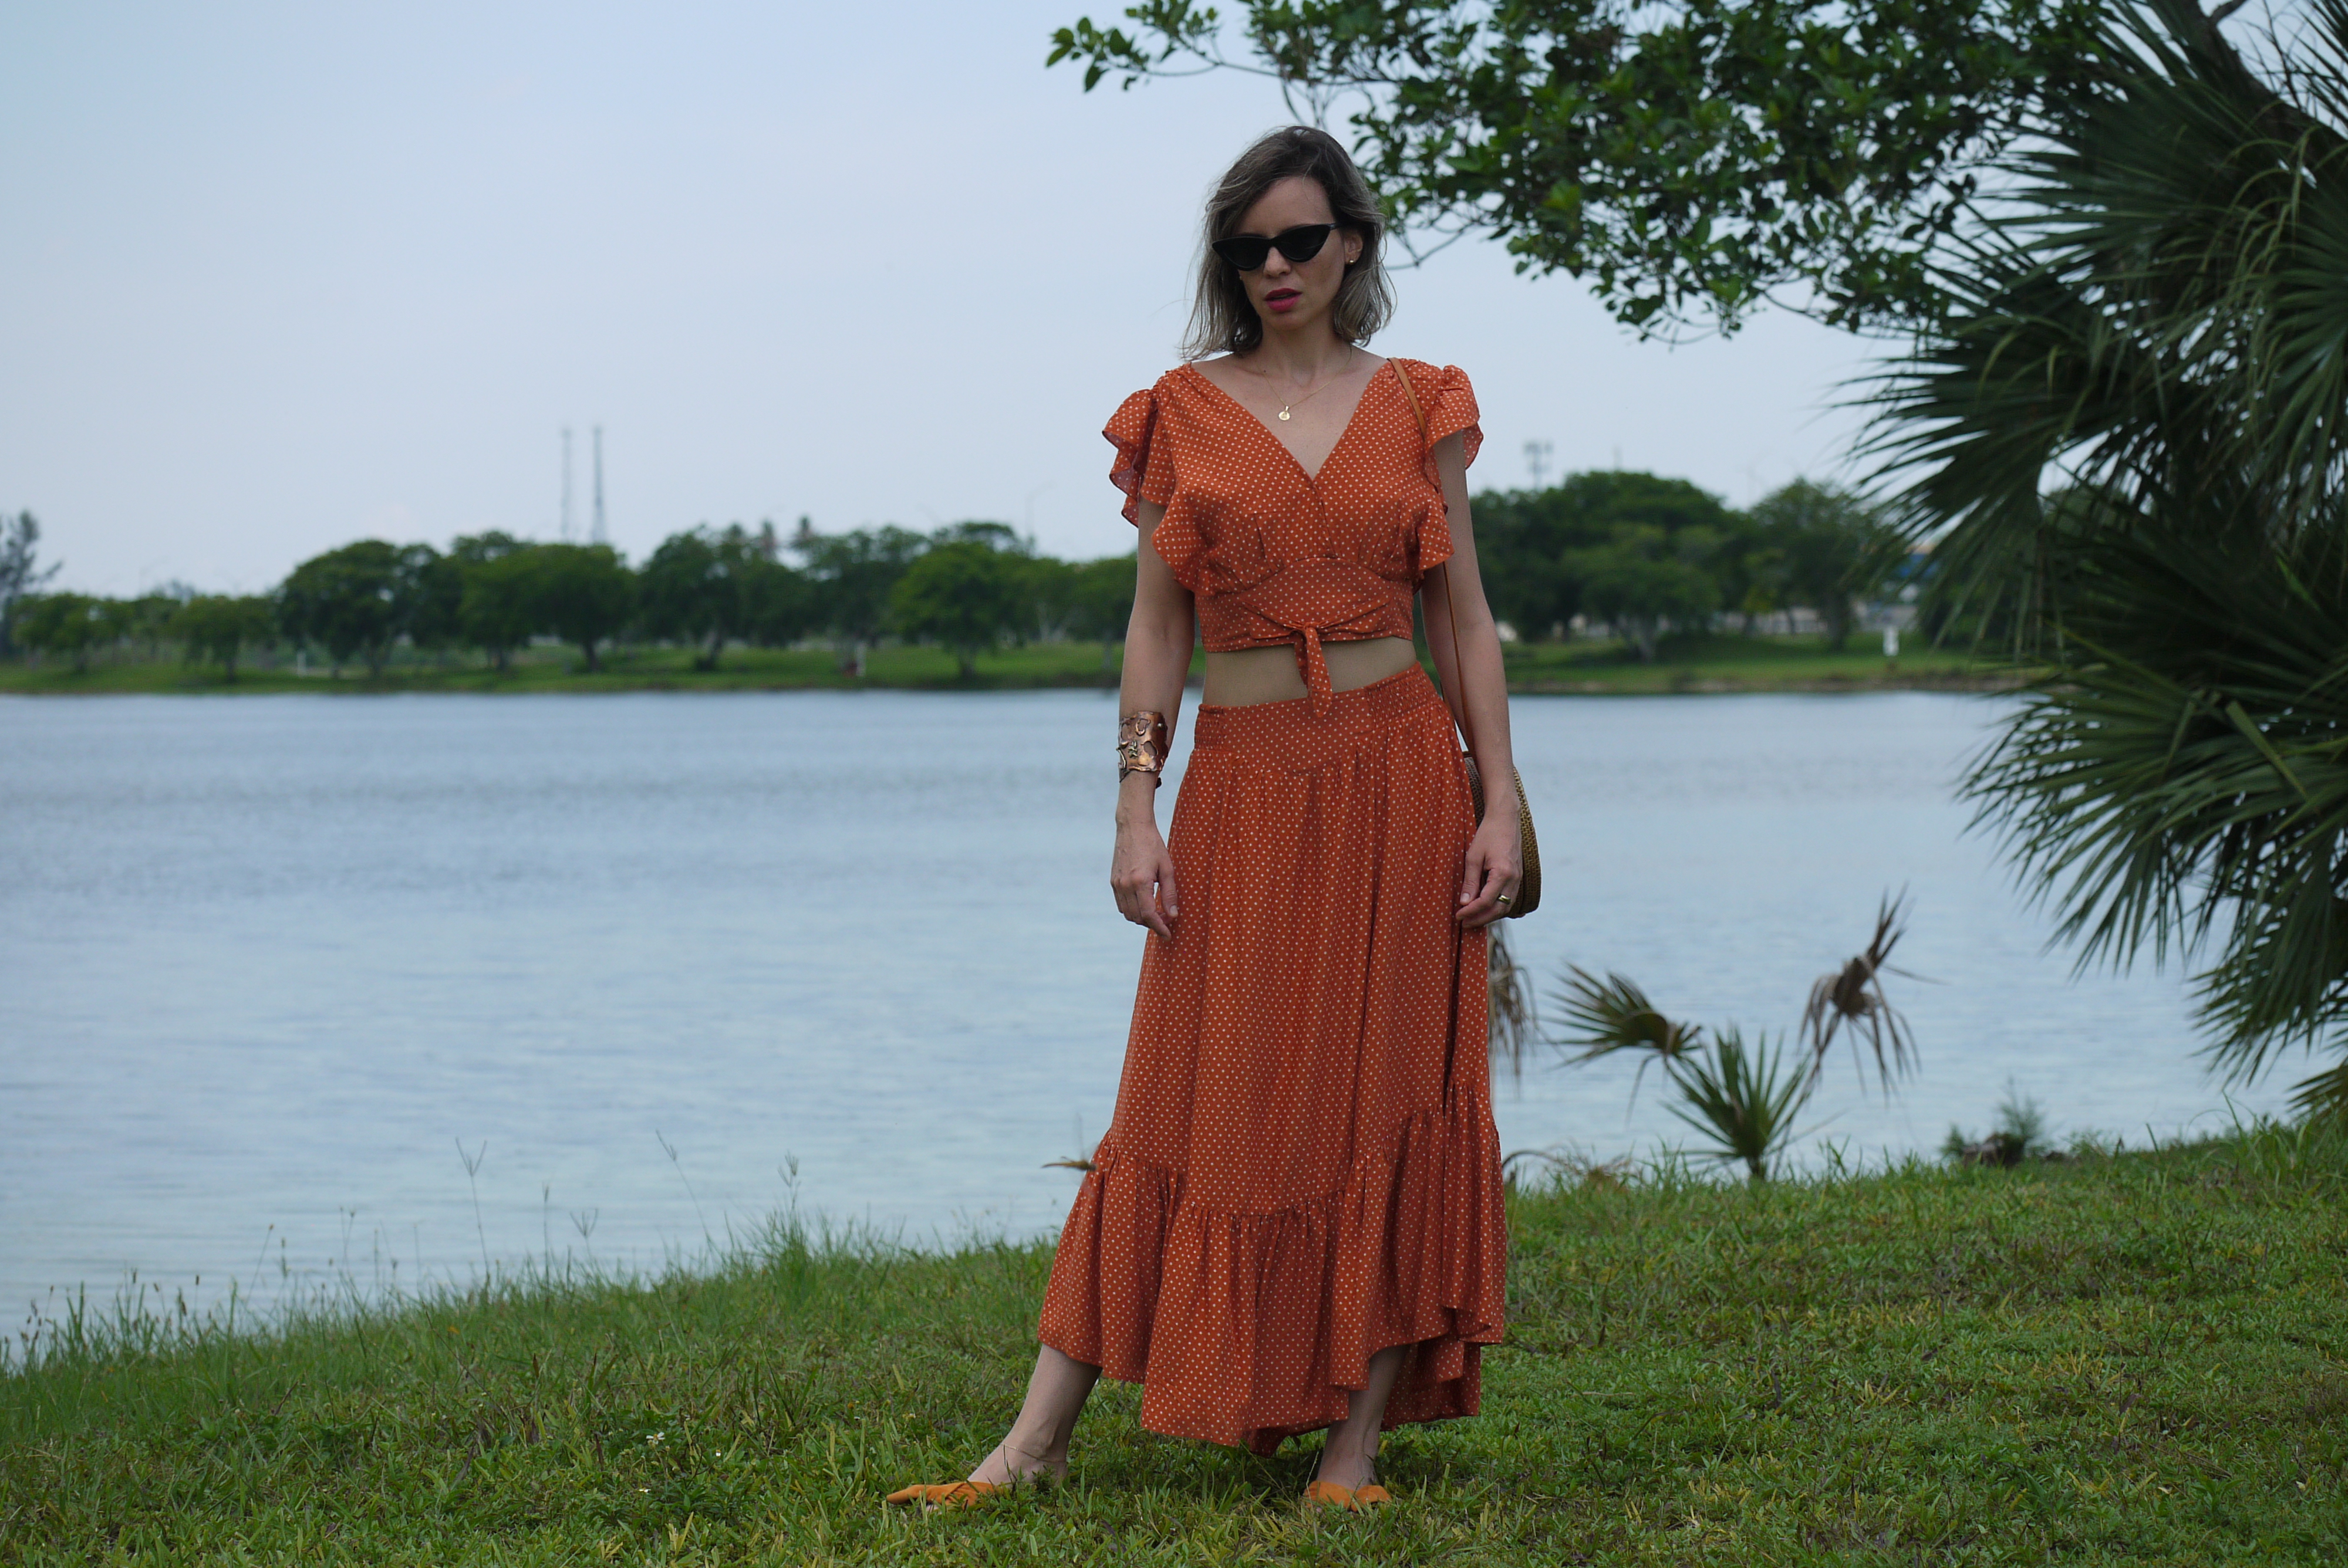 Alba Marina Otero fashion blogger from Mylovelypeople blog shares with you an inspiration por your next vacation to a warm place with this amazing set of polka dots and ruffle